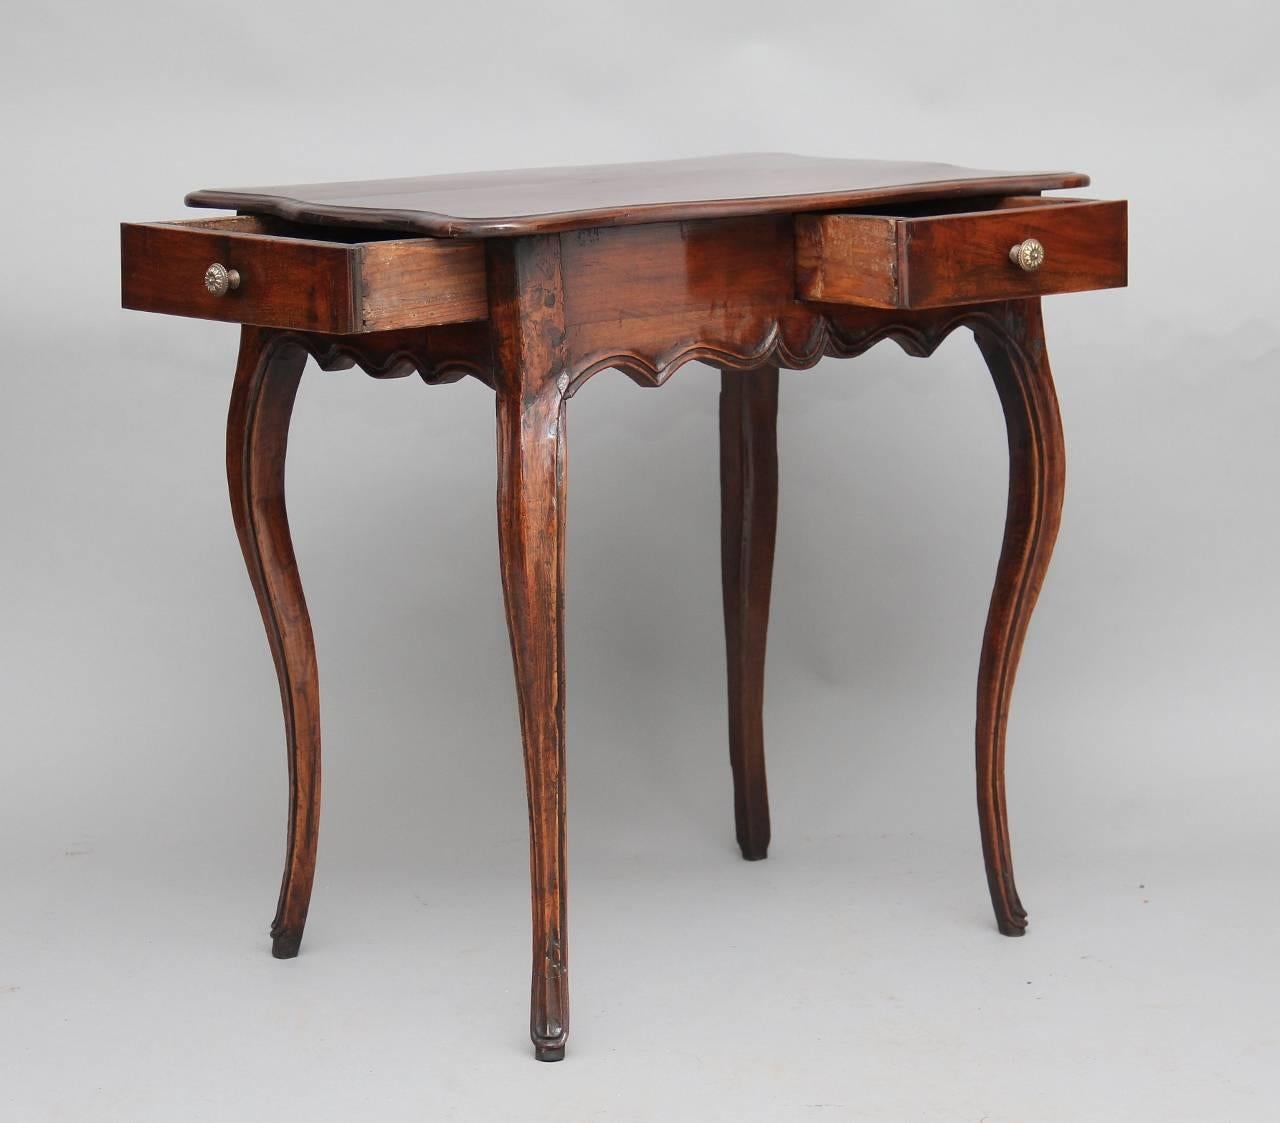 18th century French provincial side table made from fruitwood, with a nicely shaped top with a moulded edge, with two drawers below, one on the side and one at the front, with a shaped frieze running along the front, sides and back, standing on